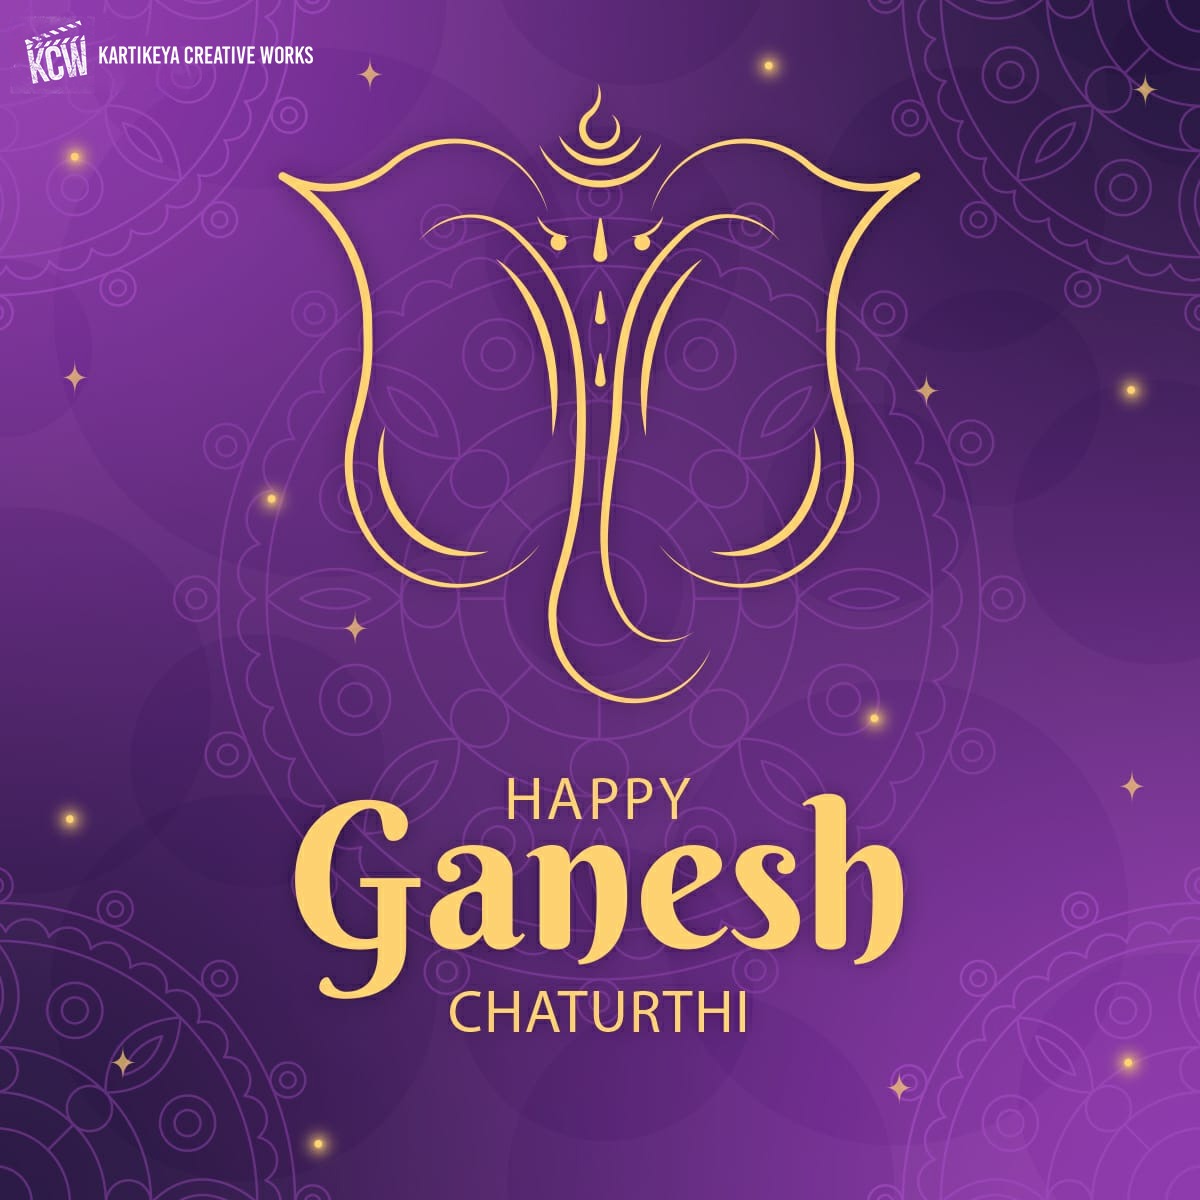 May your all dreams come true on this Vinayak Chaturthi! #HappyGaneshChaturthi